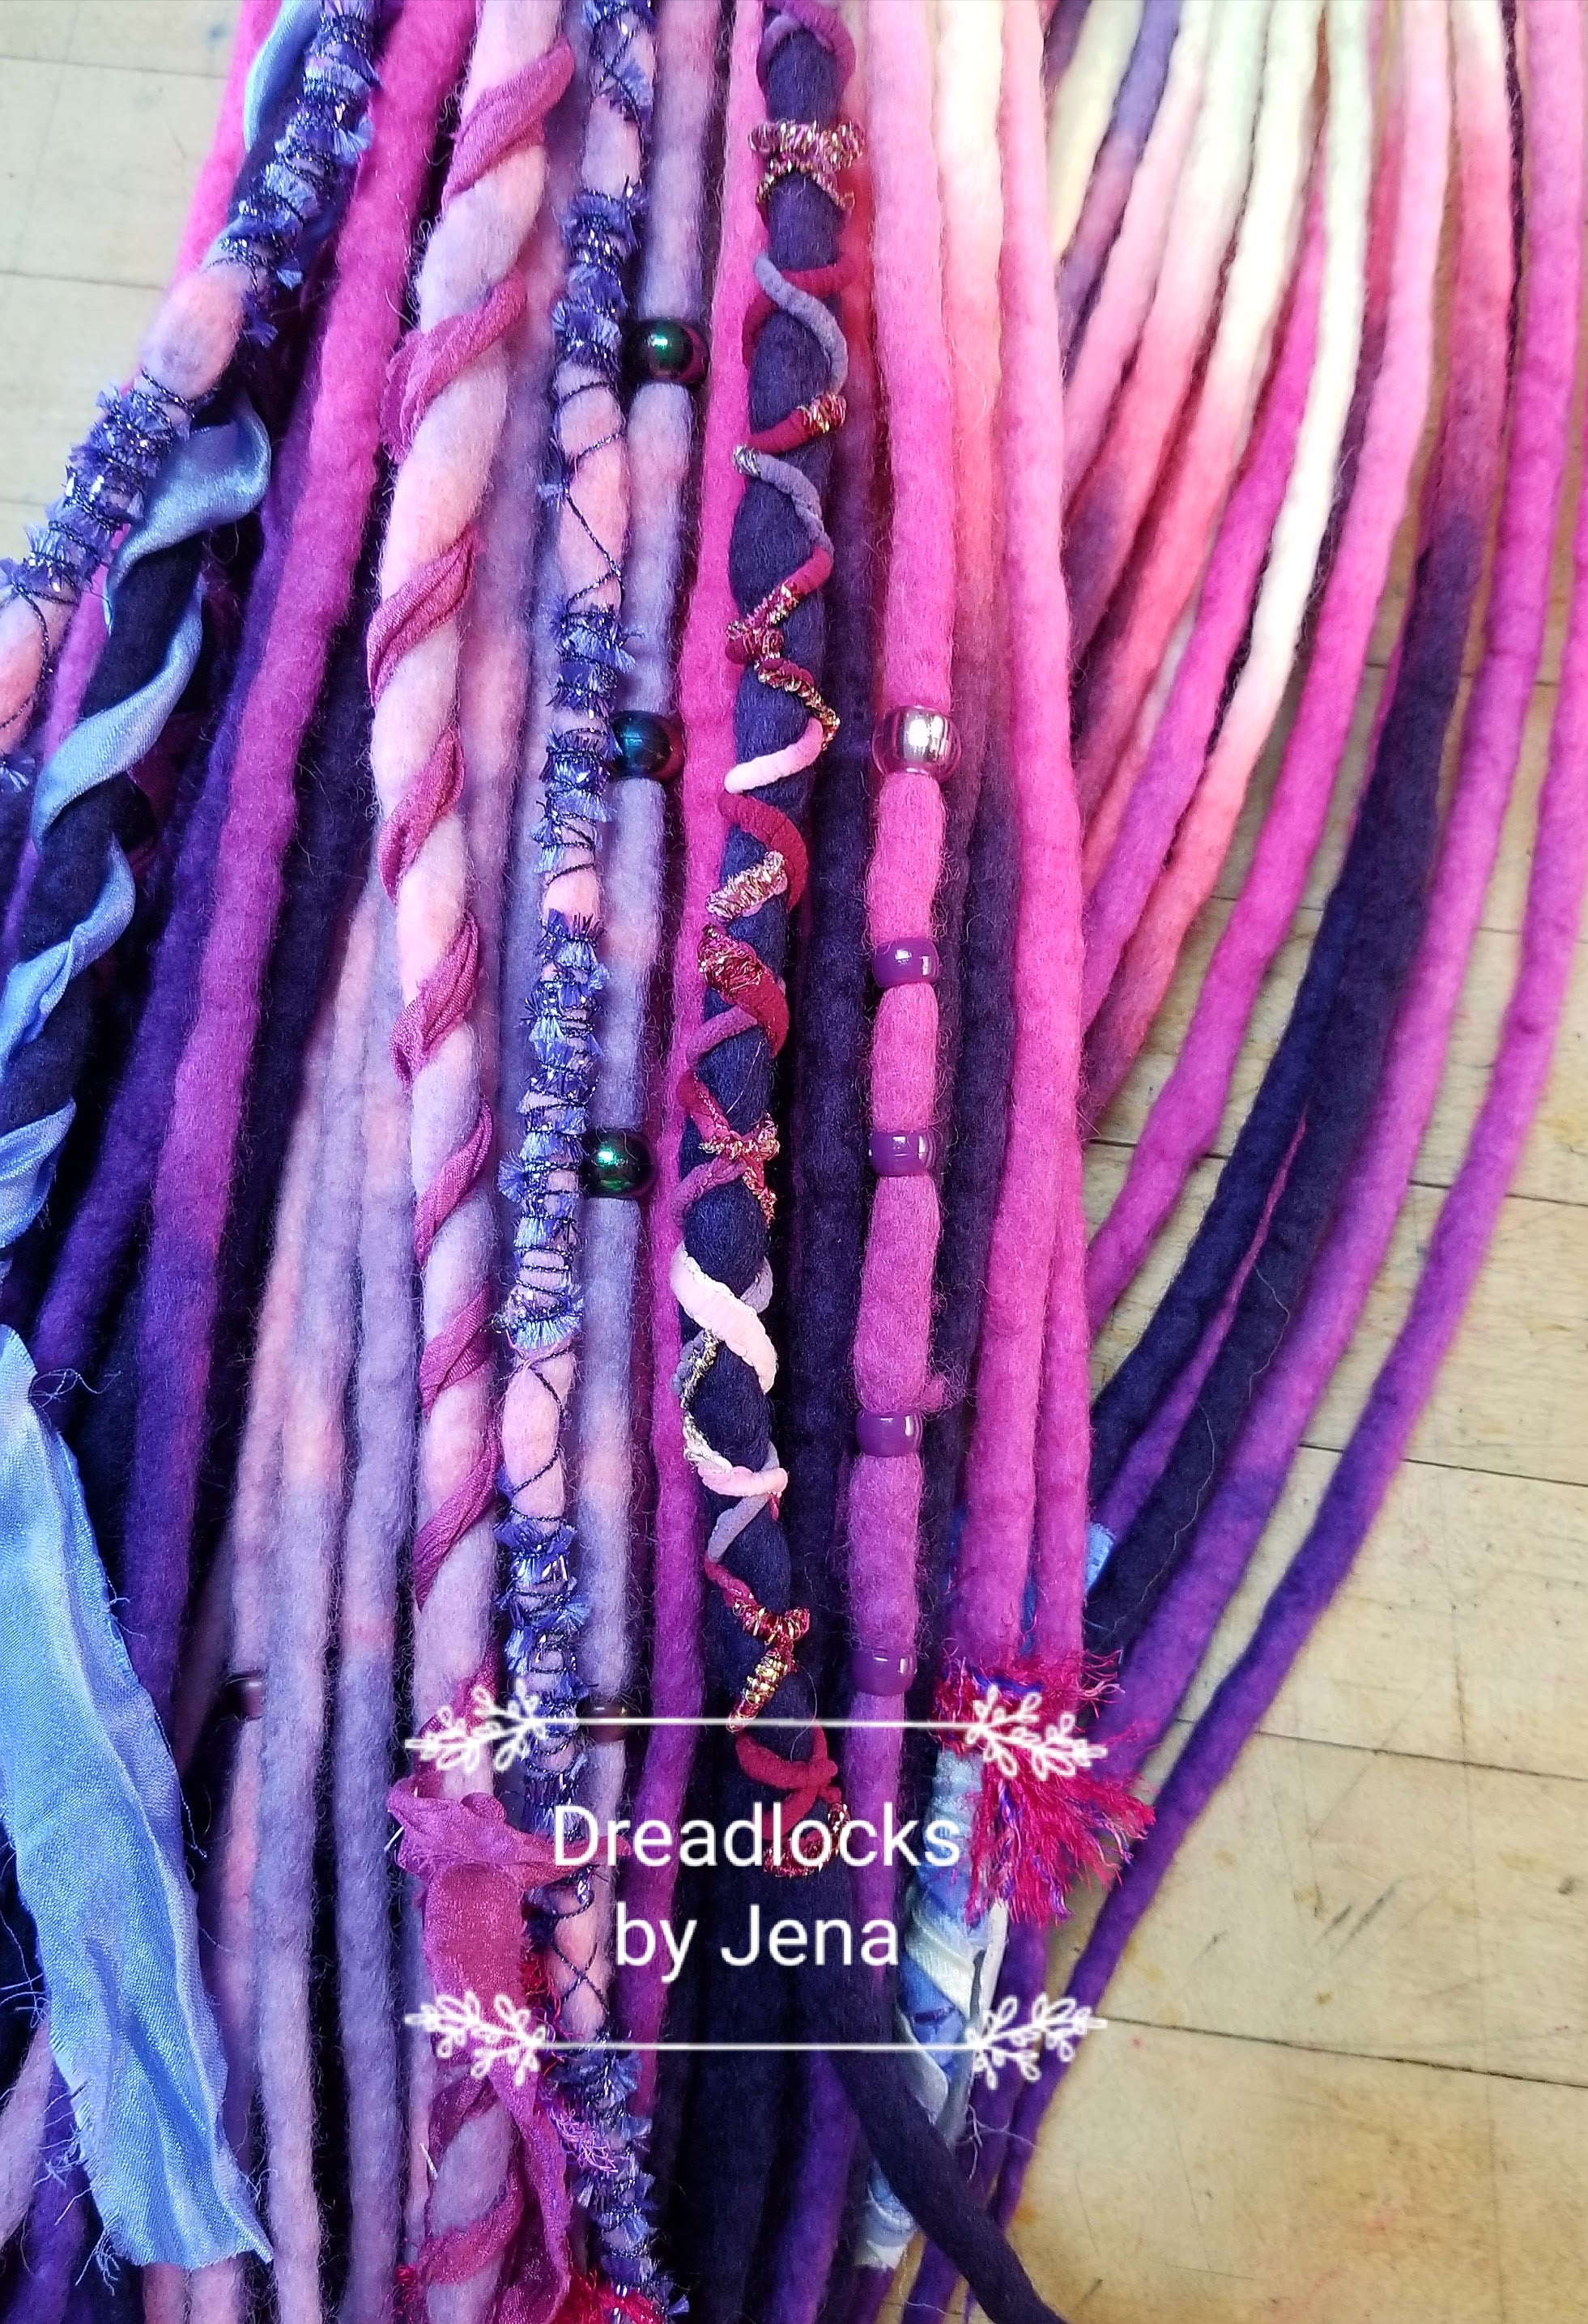 Dreadlock set of 60 Double Ended Wool Dread set :Cheshire Cat" thymed